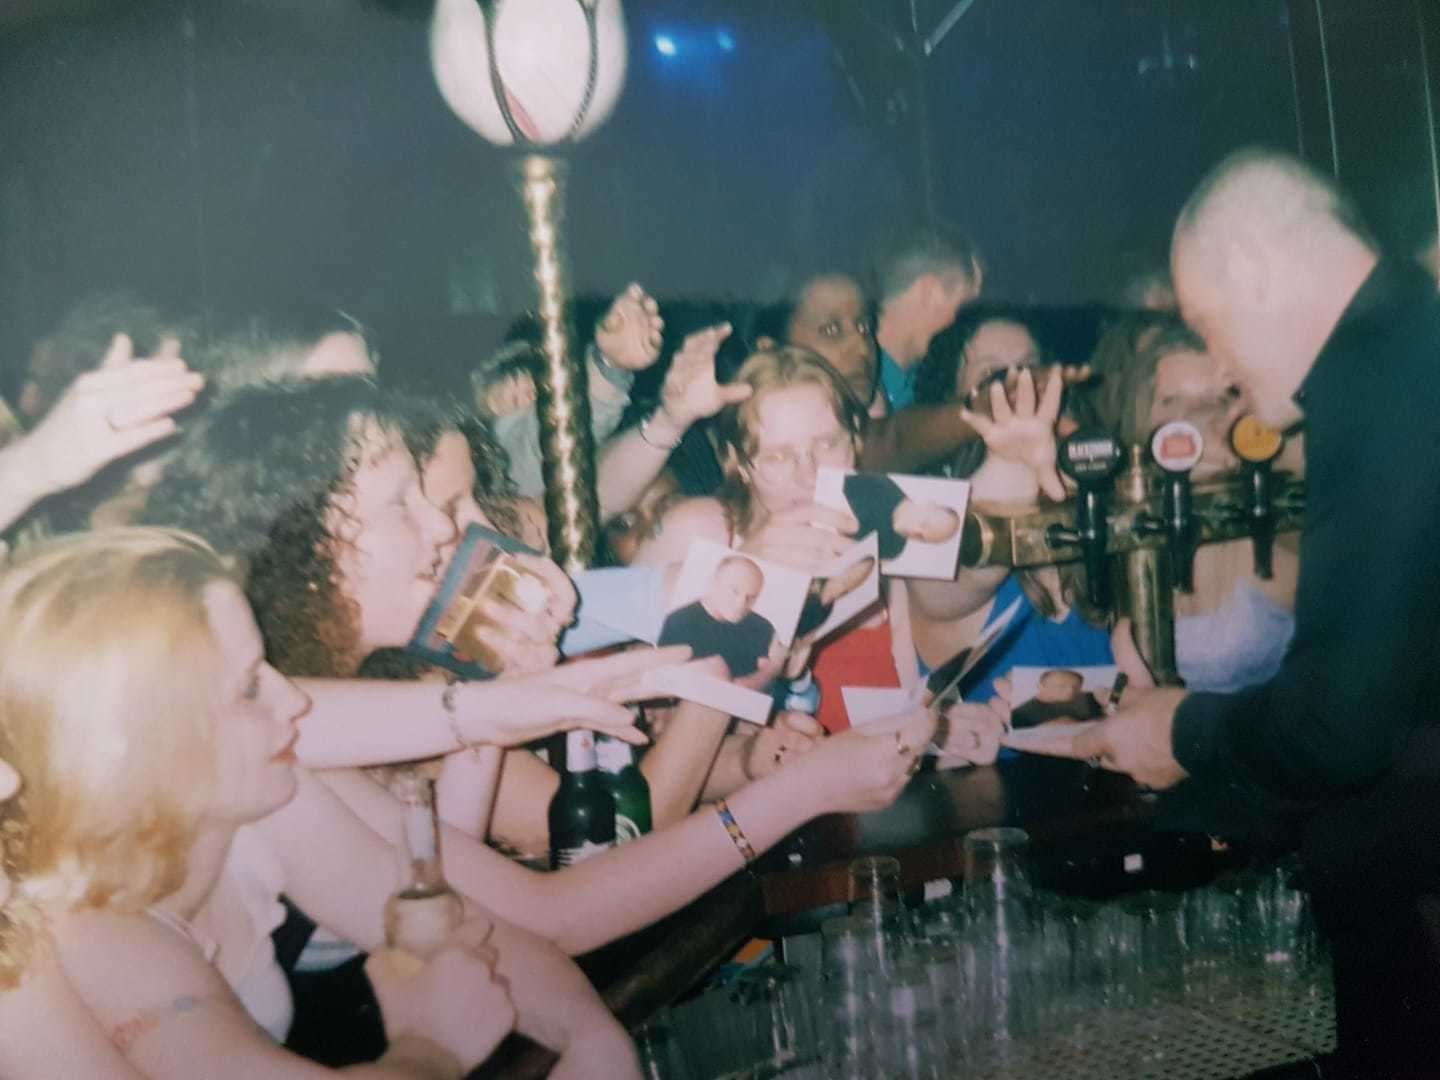 Ross Kemp signing pictures of himself at the Priz in the 90s. Picture: Kev Goodwin